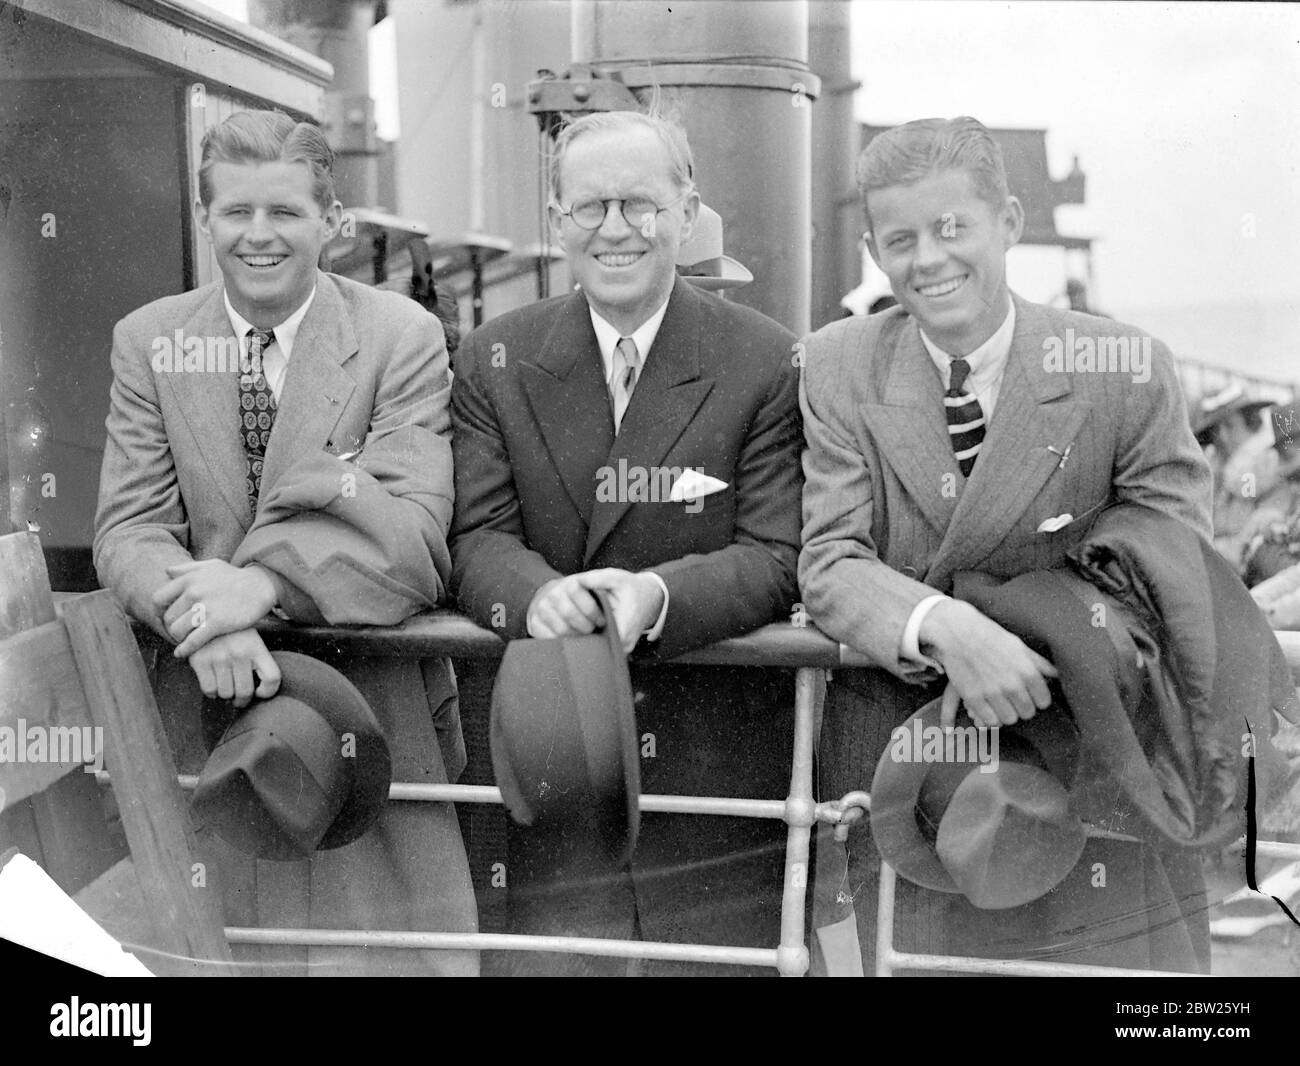 Us Ambassador Arrives Back In England With Two Grown Sons Mr Joseph P Kennedy The American Ambassador To London Arrived At Southampton On The Normandie After His Visit To The United States